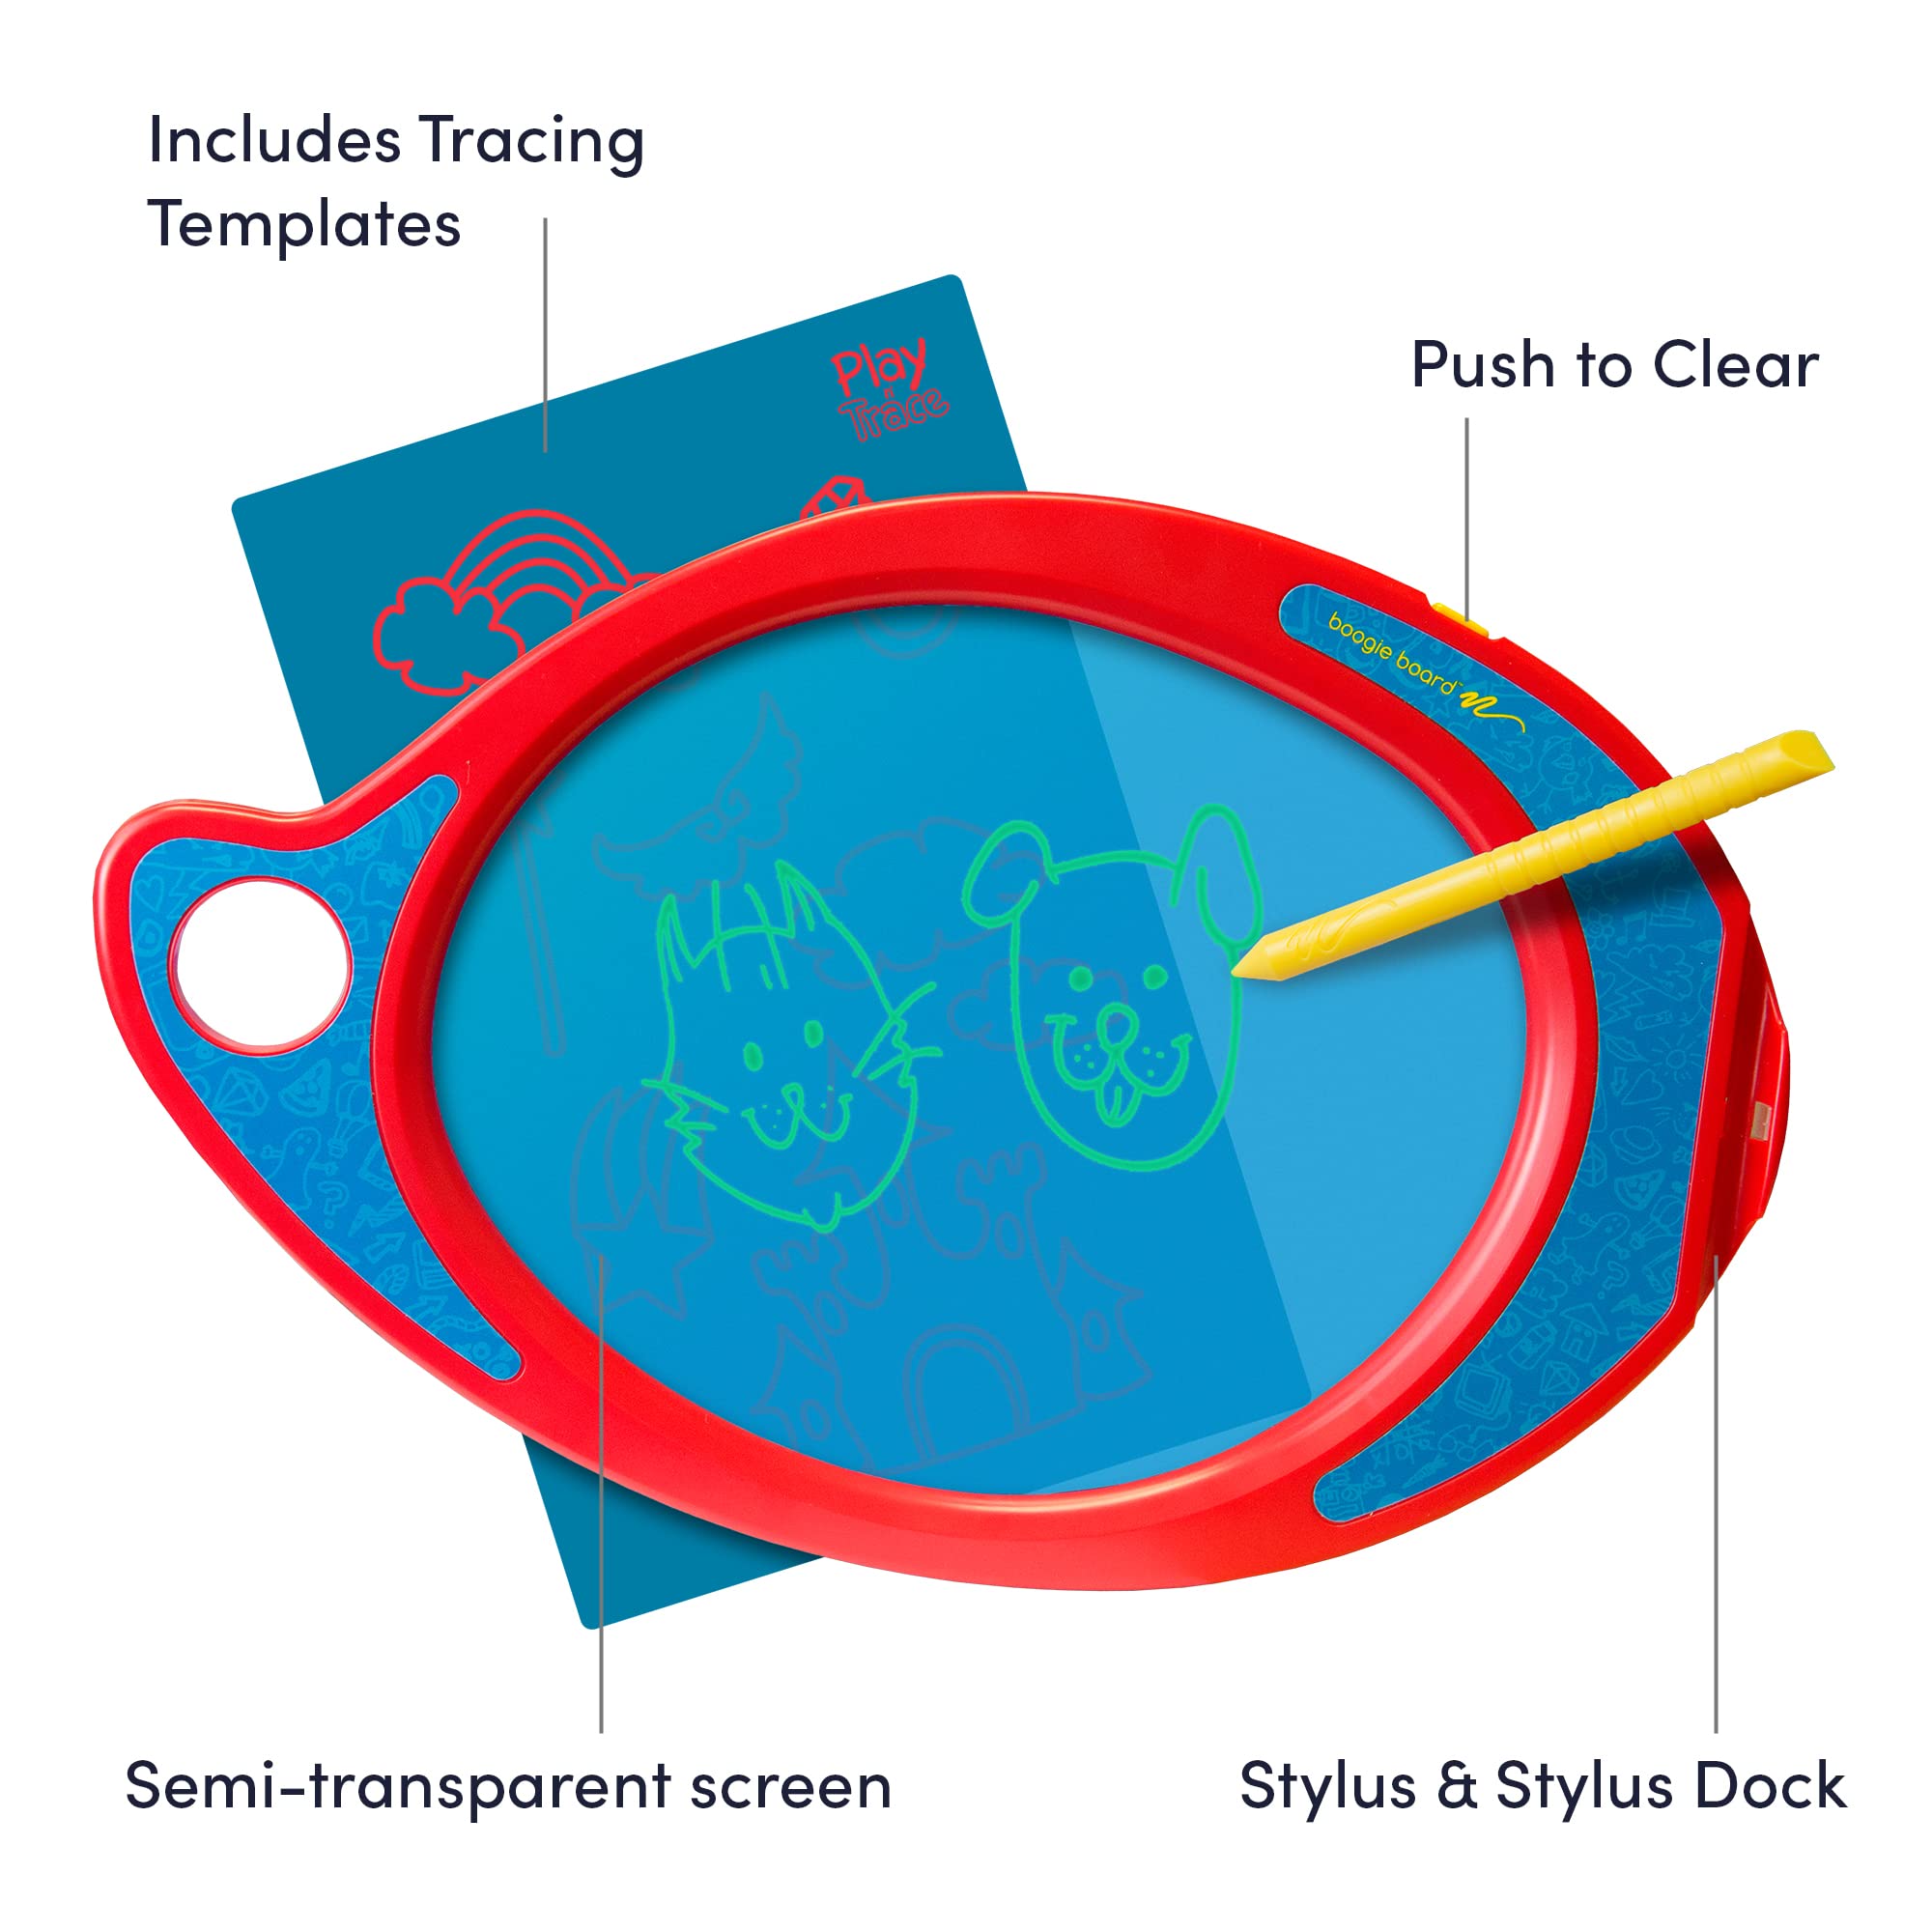 Boogie Board Play n' Trace with Transparent Tracing Board, Stylus, and Templates for Kids to Write, Trace and Draw, For Boys and Girls, Ages 3+